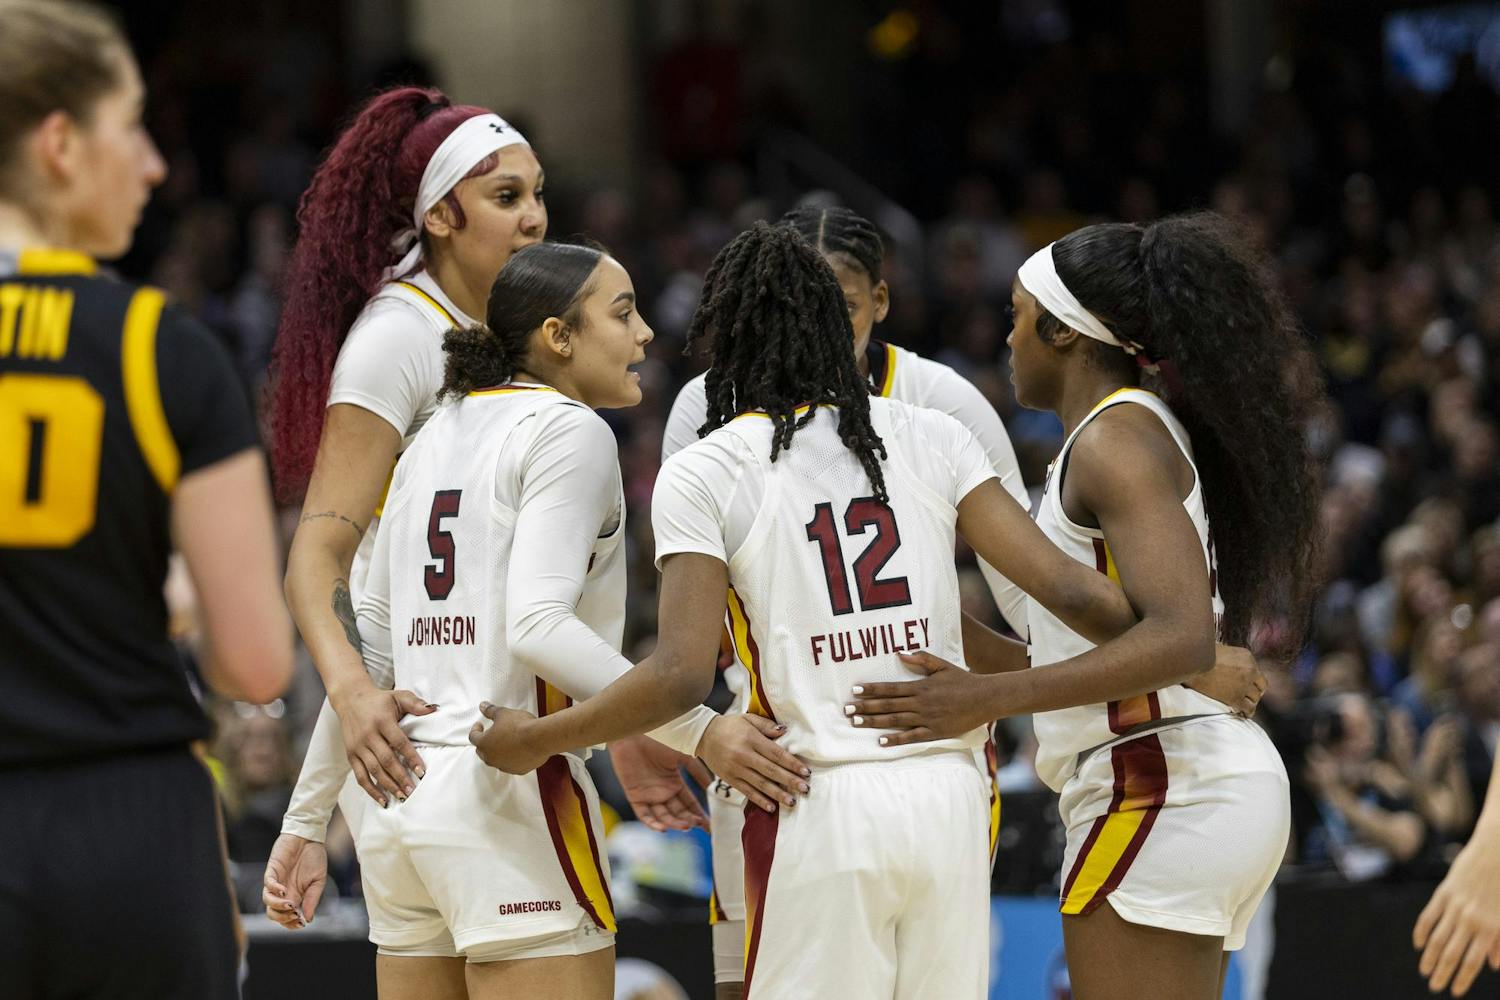 The Gamecocks huddle after a foul is called during the NCAA national championship game in Cleveland, Ohio. Both teams showed off the members' physicality throughout the game, with the Gamecocks tallying 17 fouls and the Hawkeyes totaling 14 fouls.